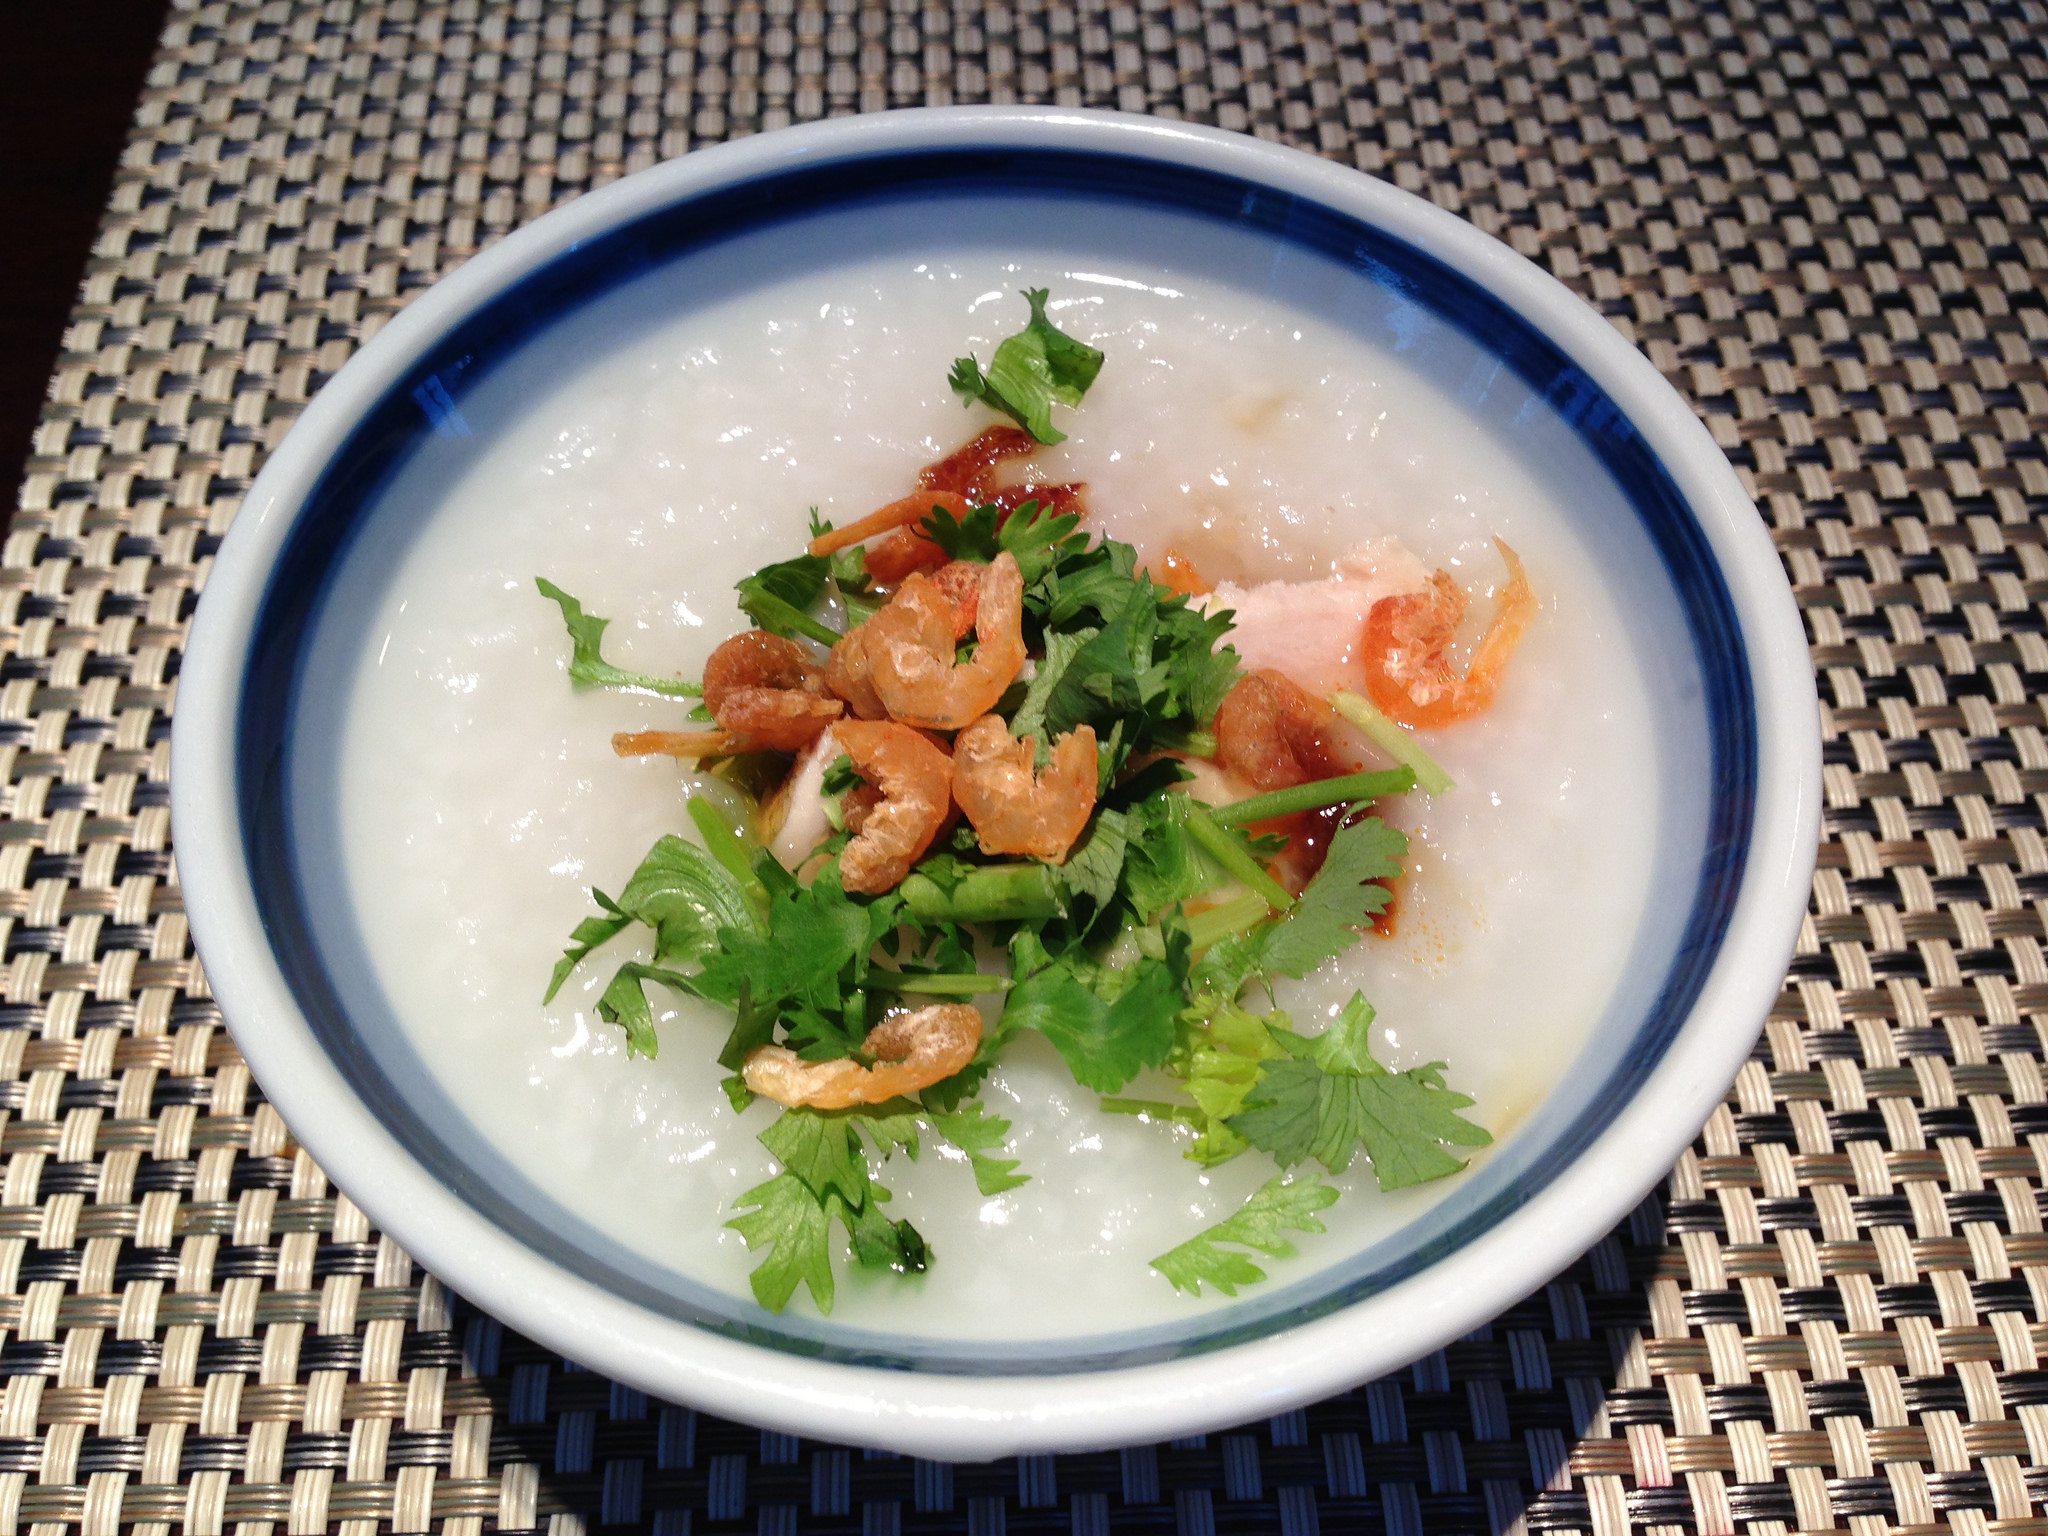 Why You Should Really Try Congee If You Have An Upset Stomach